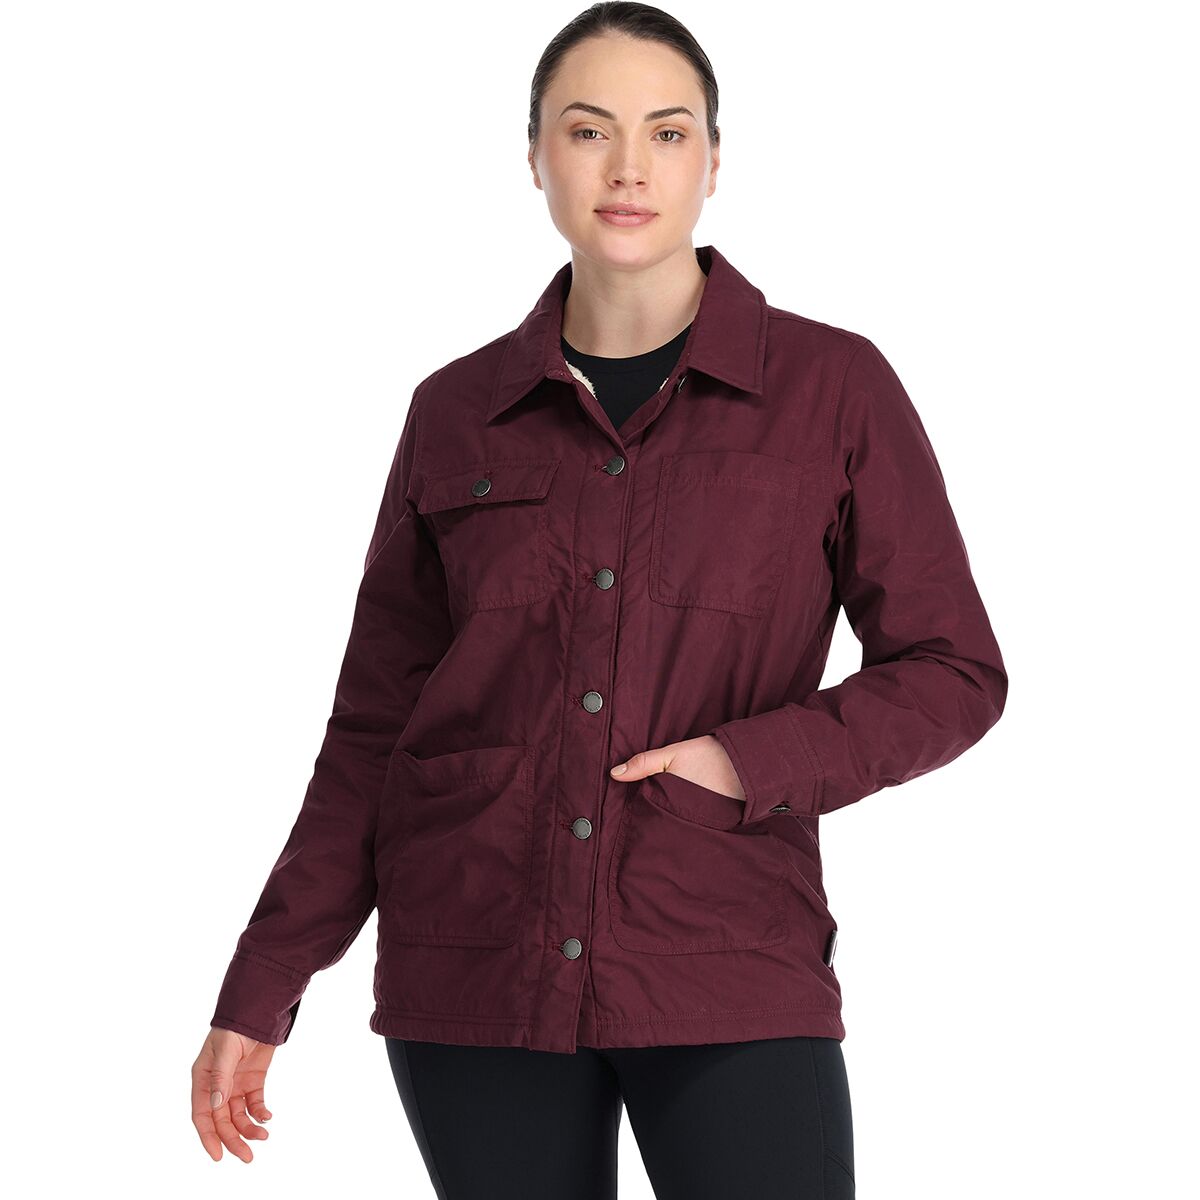 Outdoor Research Lined Chore Jacket - Women's